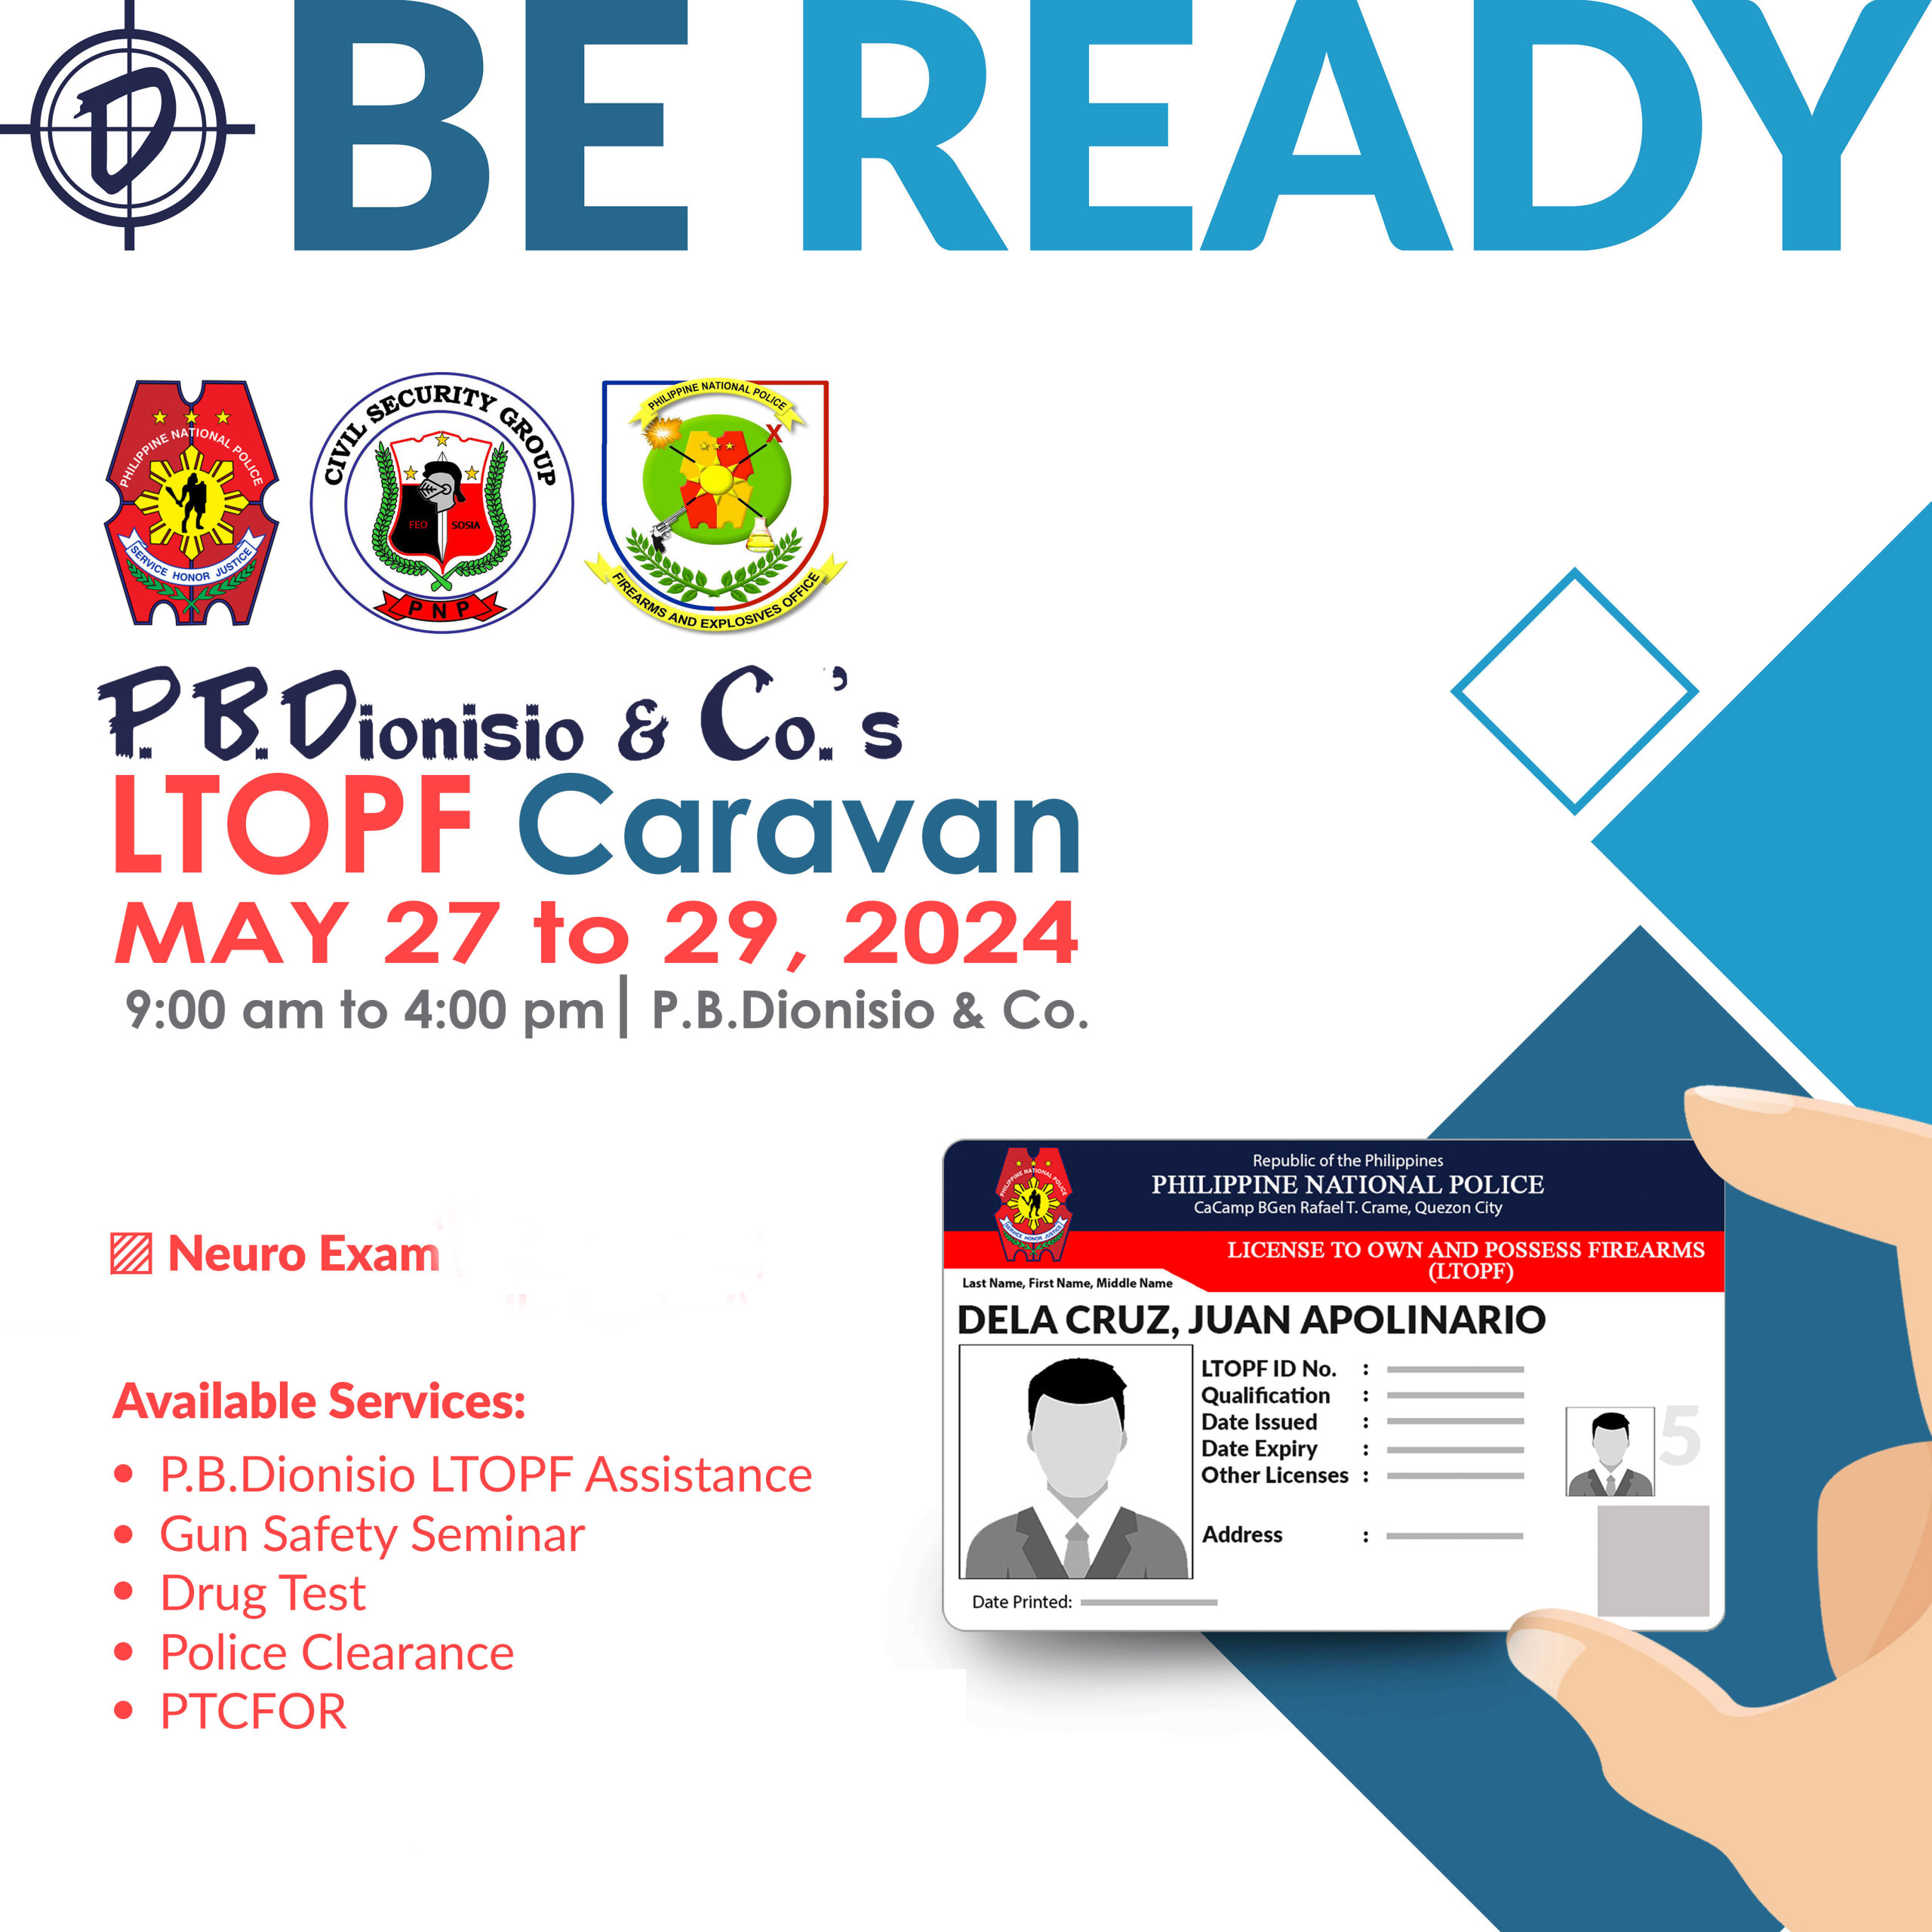 LTOPF Caravan on May 27 to 29, 2024 at P.B.Dionisio & Co.